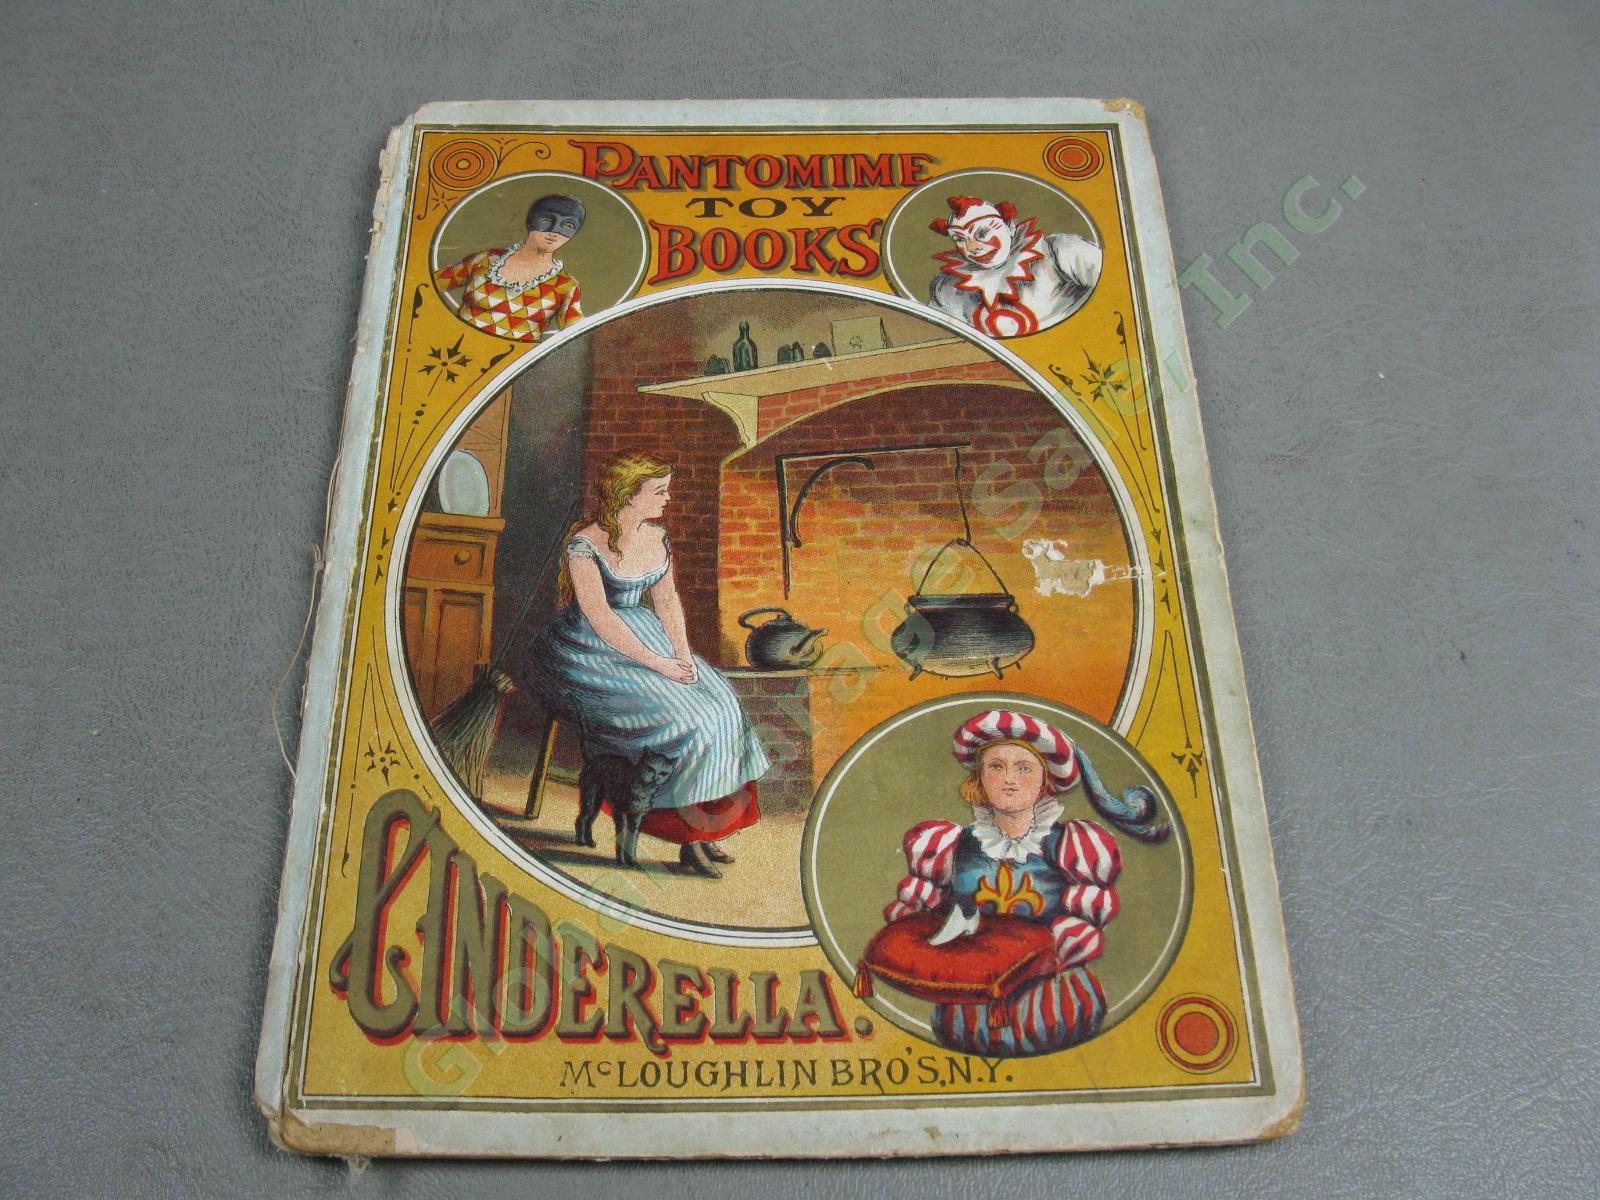 1870s Antique Pop Up Pantomime Toy Kids Book Cinderella The Little Glass Slipper